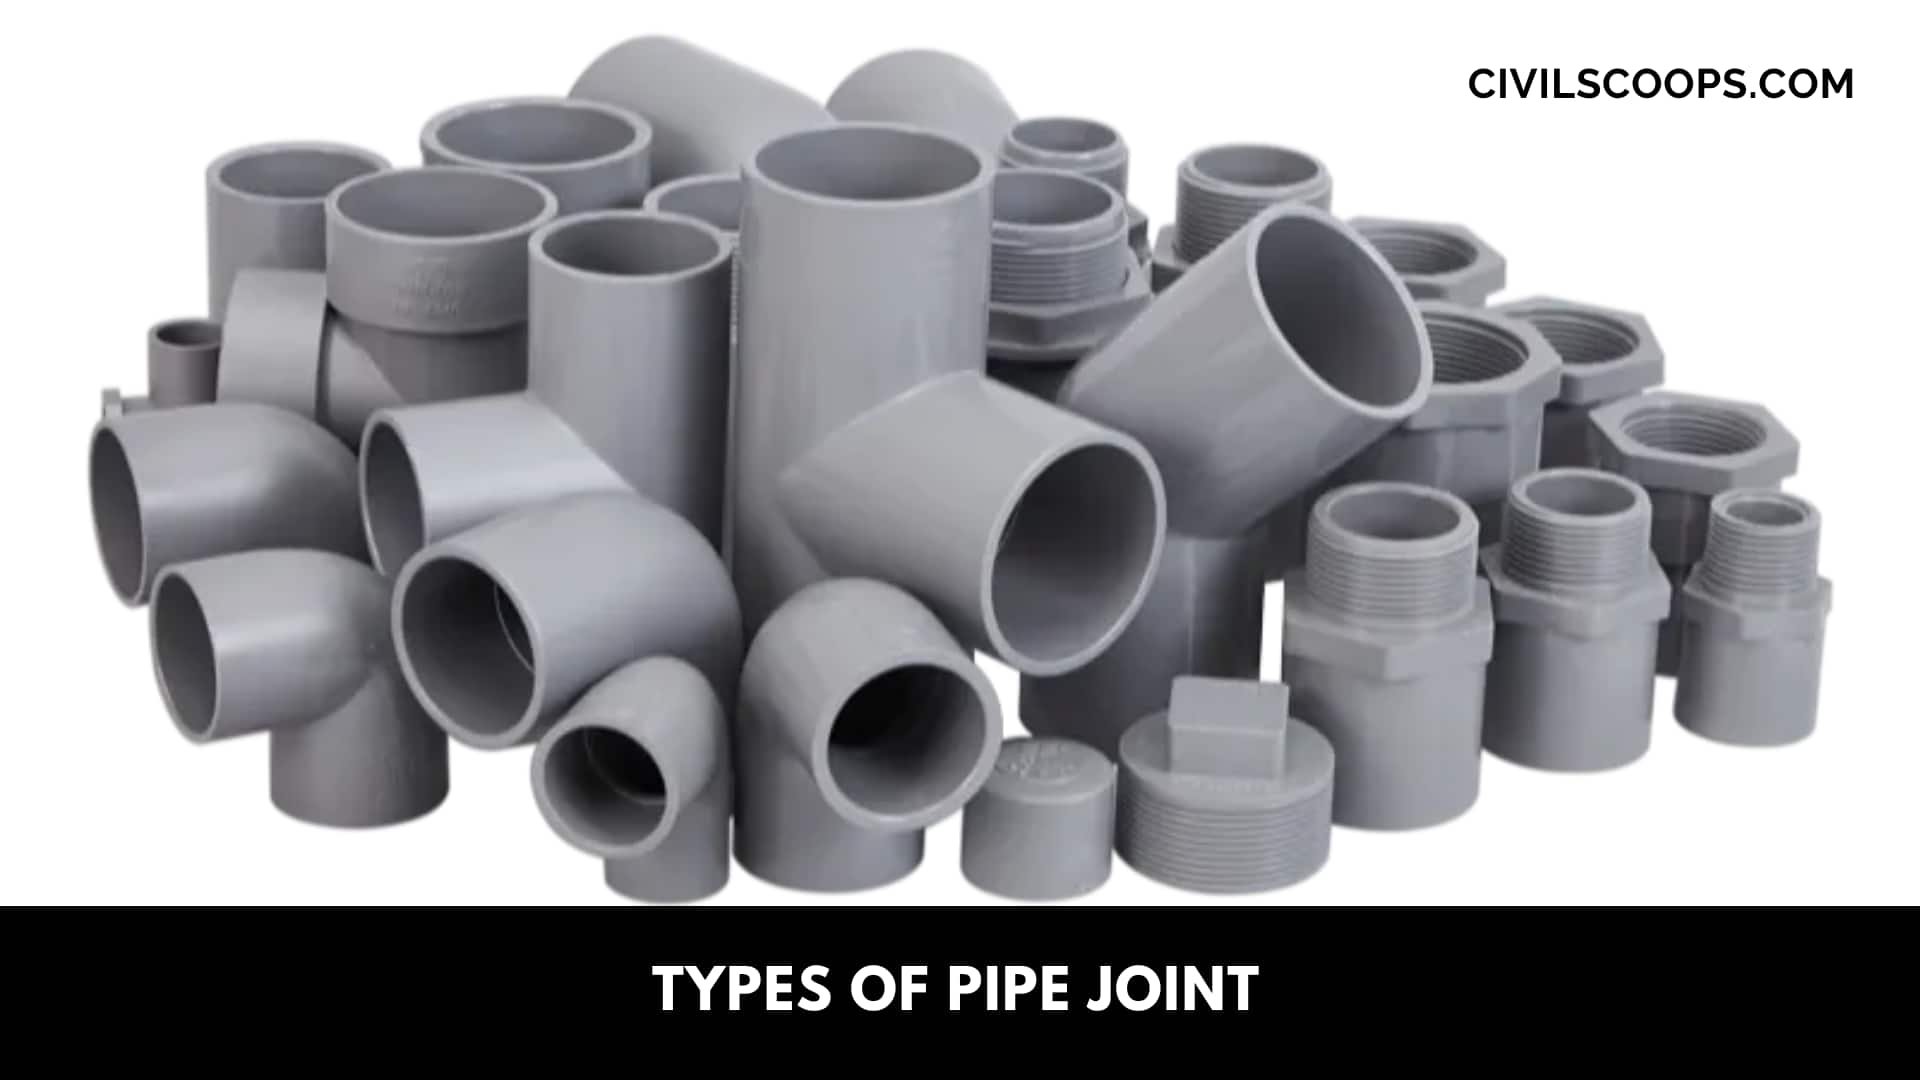 Types of Pipe Joint